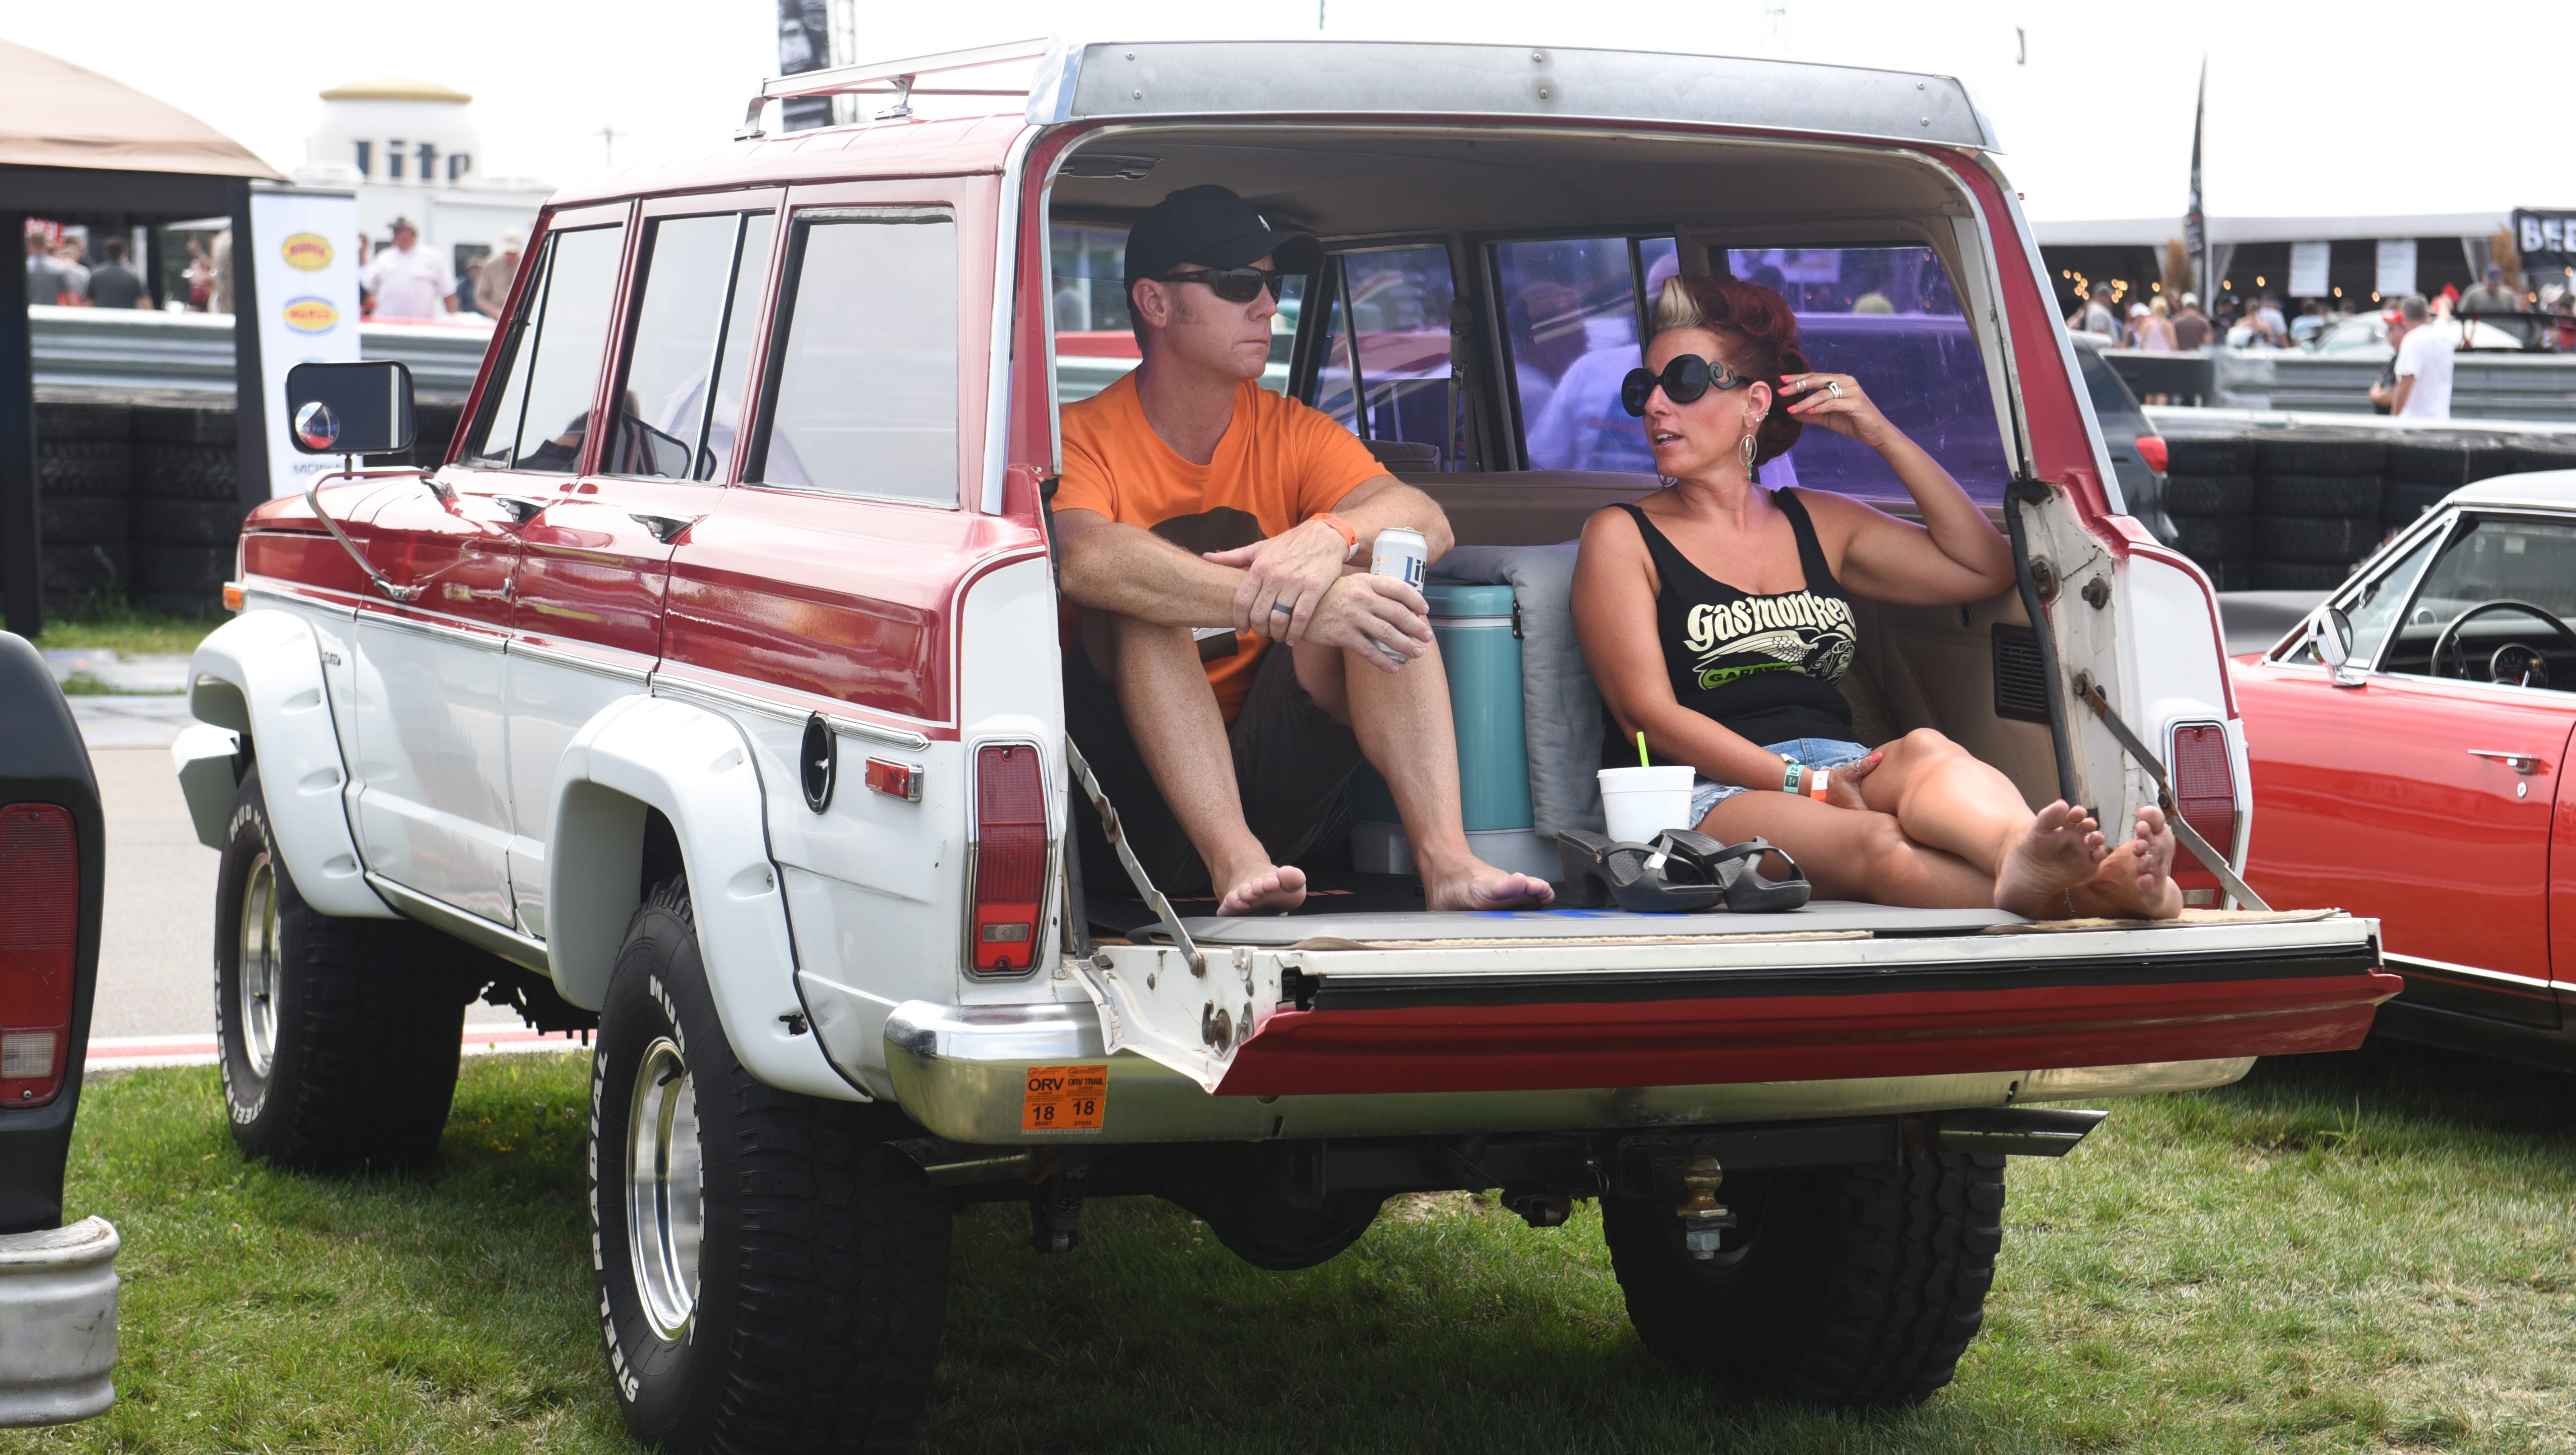 Joe Cholewa (left) and Michelle Biebel, both of Lincoln Park, watch the Dodge drift rides  demonstration  from inside their 1983 Jeep Cherokee .